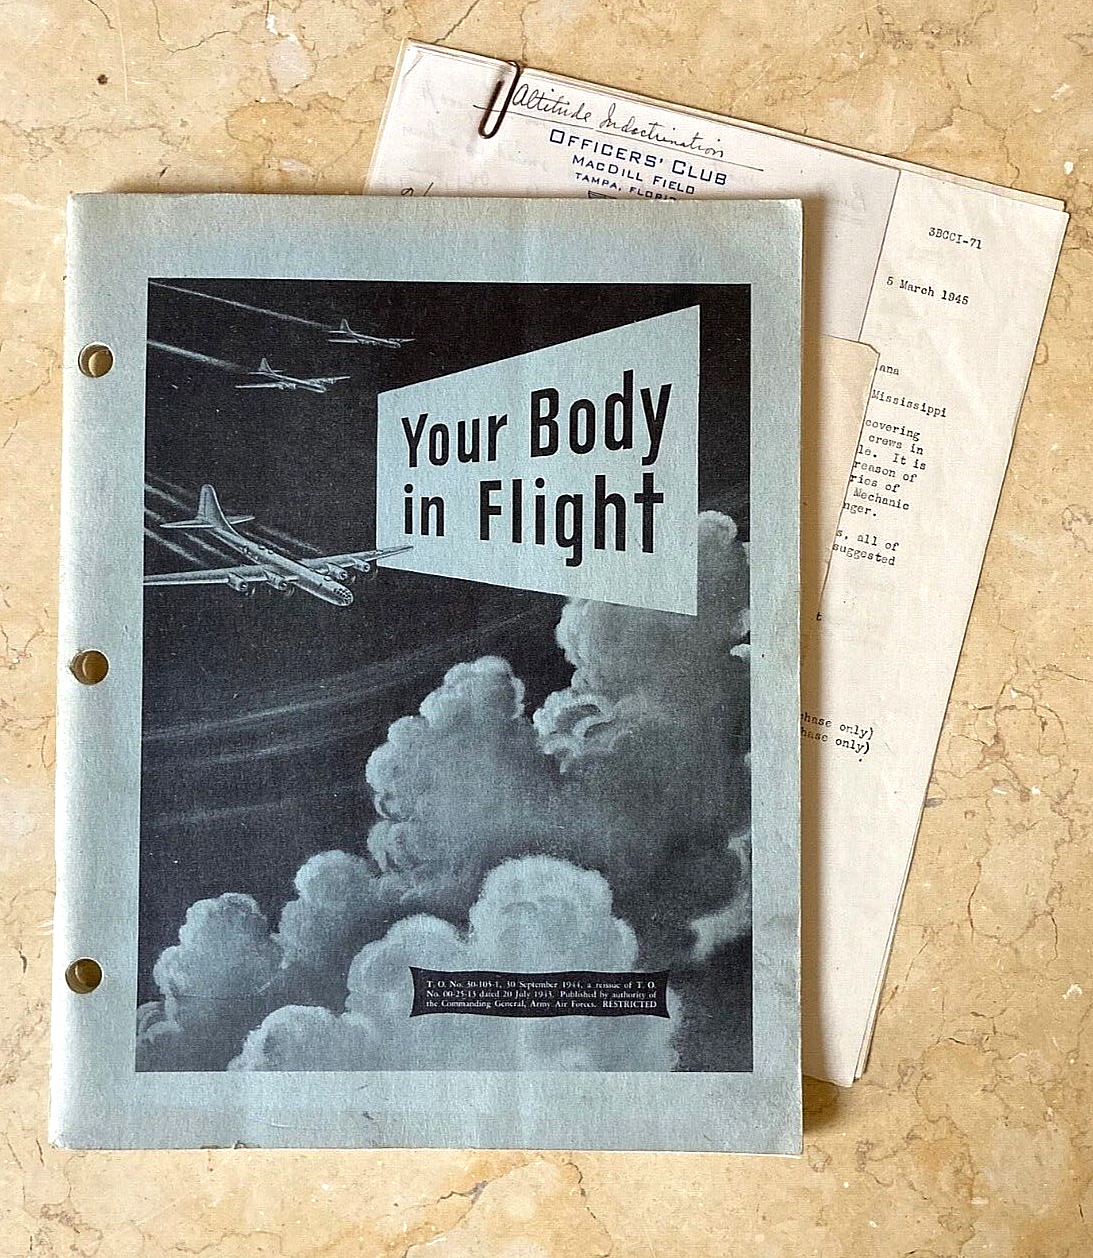 RARE US ARMY AIR FORCES B29 SUPERFORTRESS VERSION YOUR BODY in FLIGHT 1944 BOOK